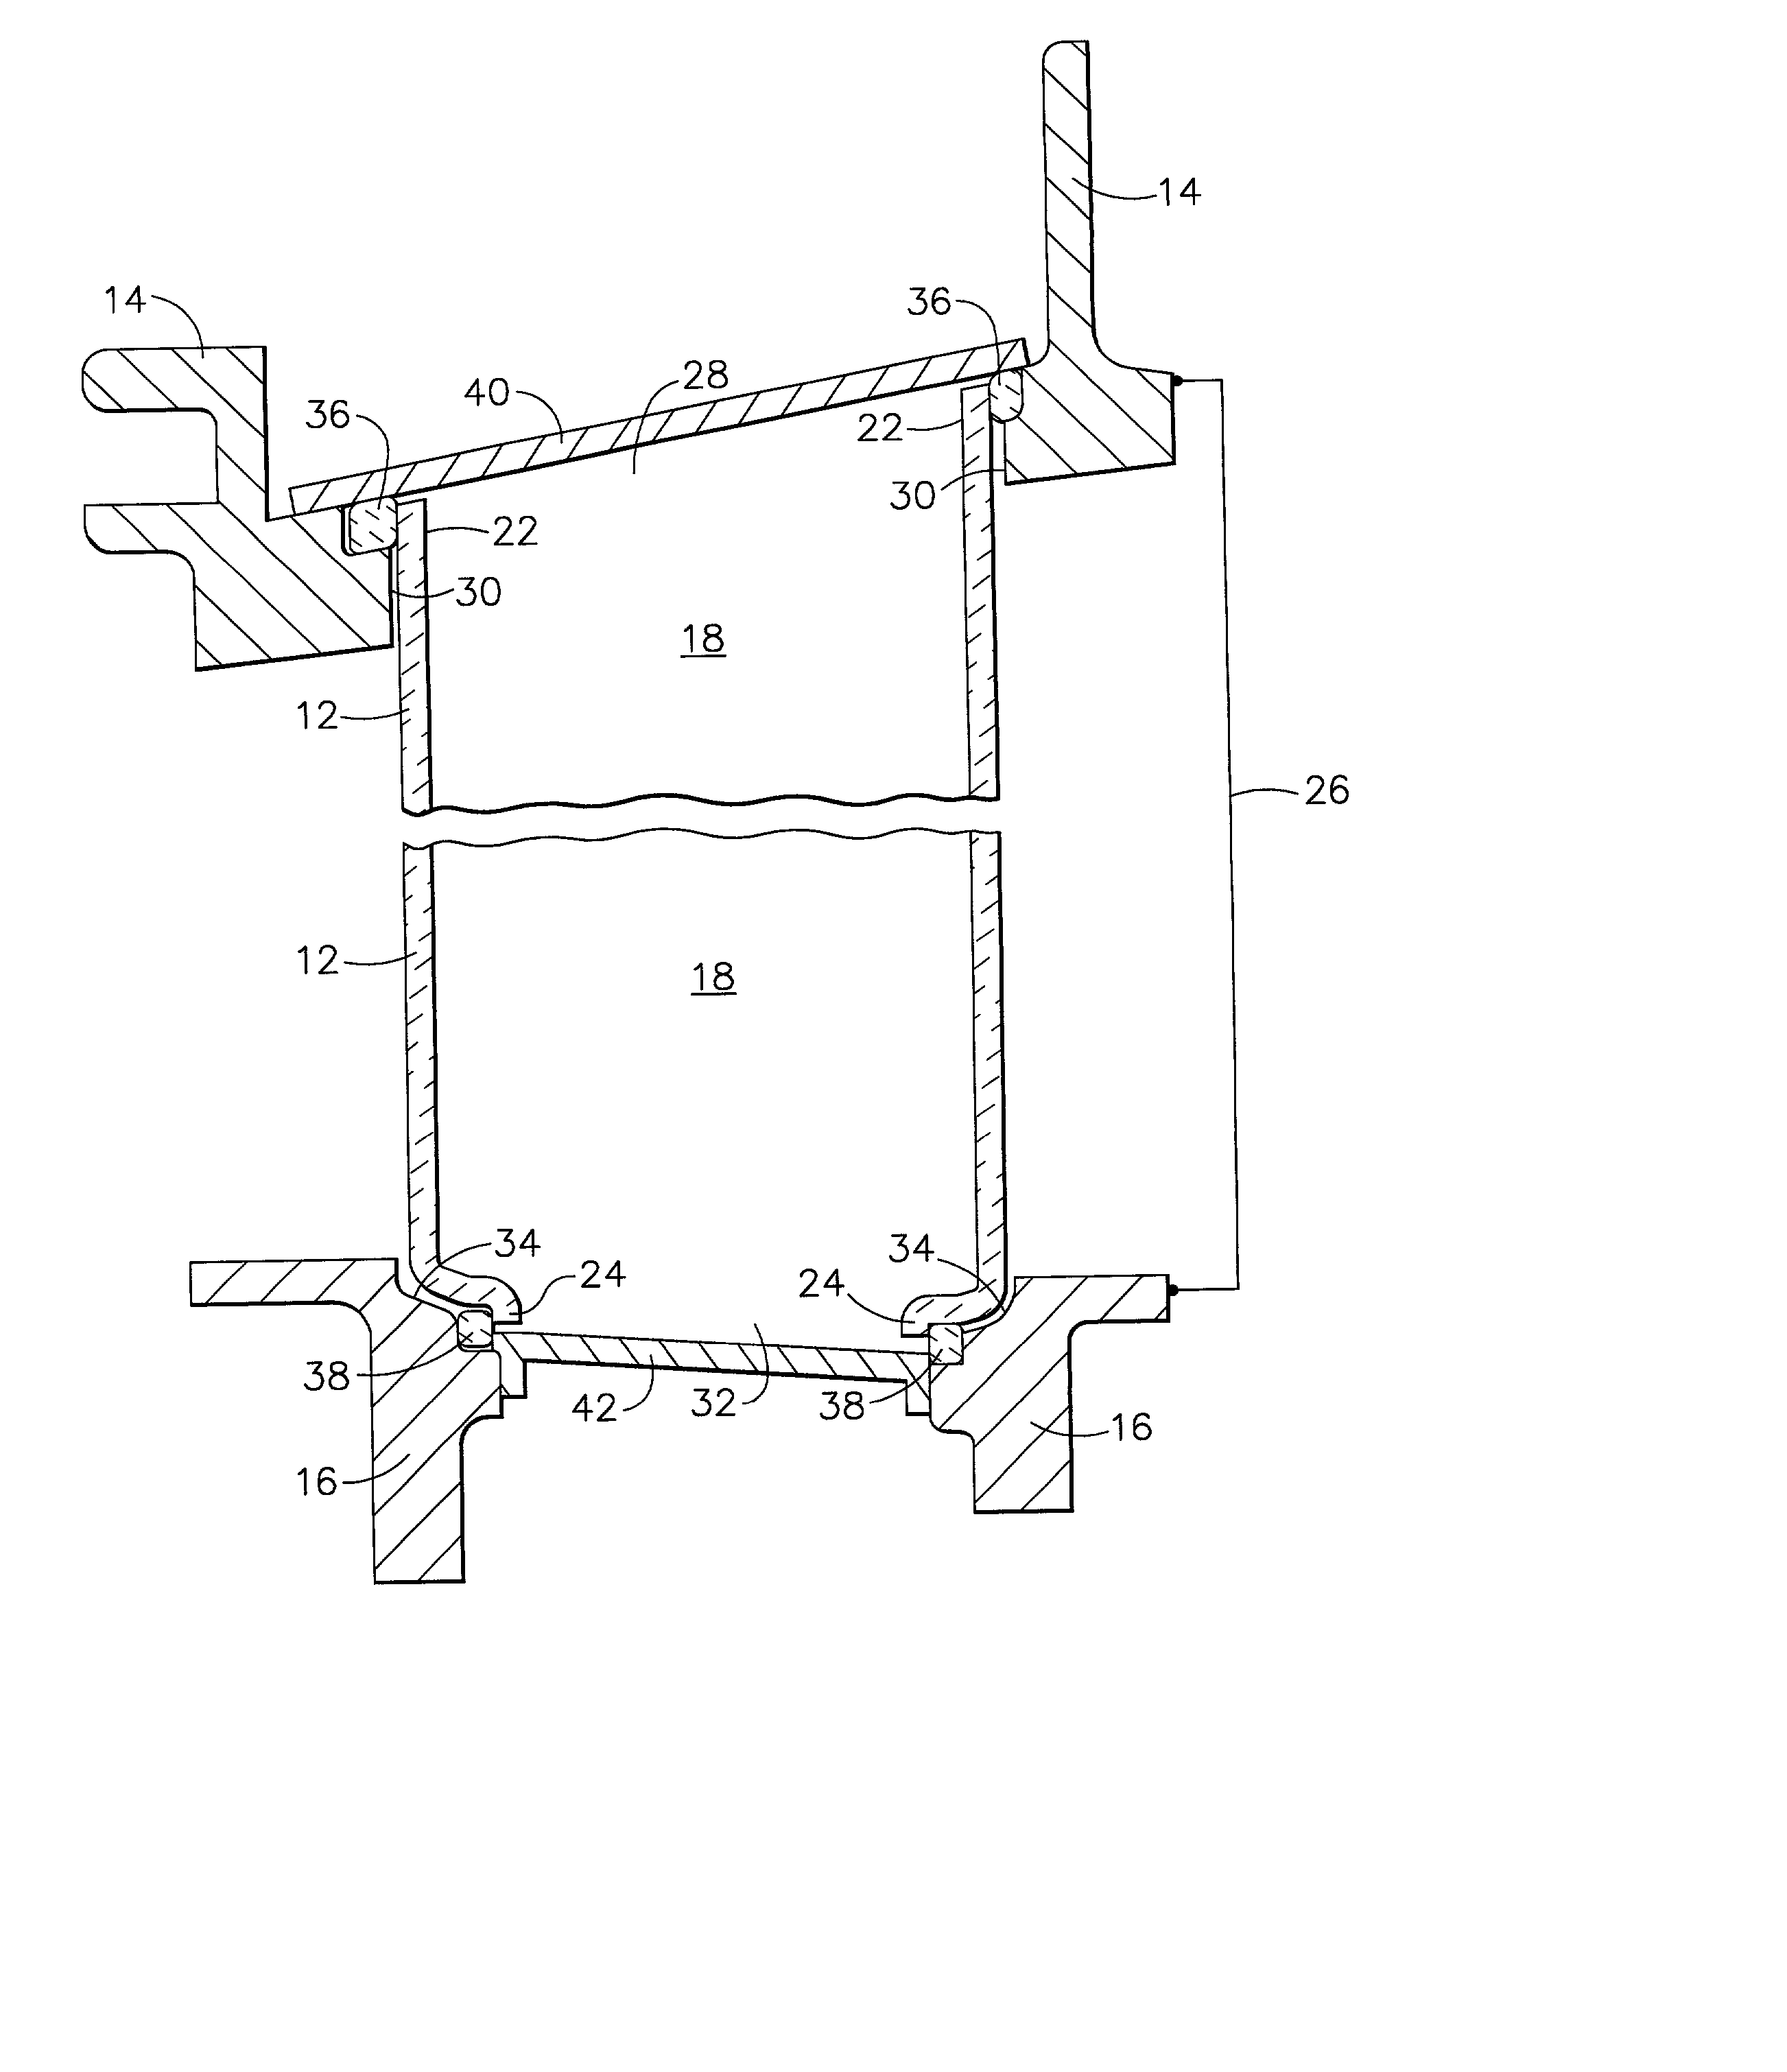 Turbine vane assembly including a low ductility vane